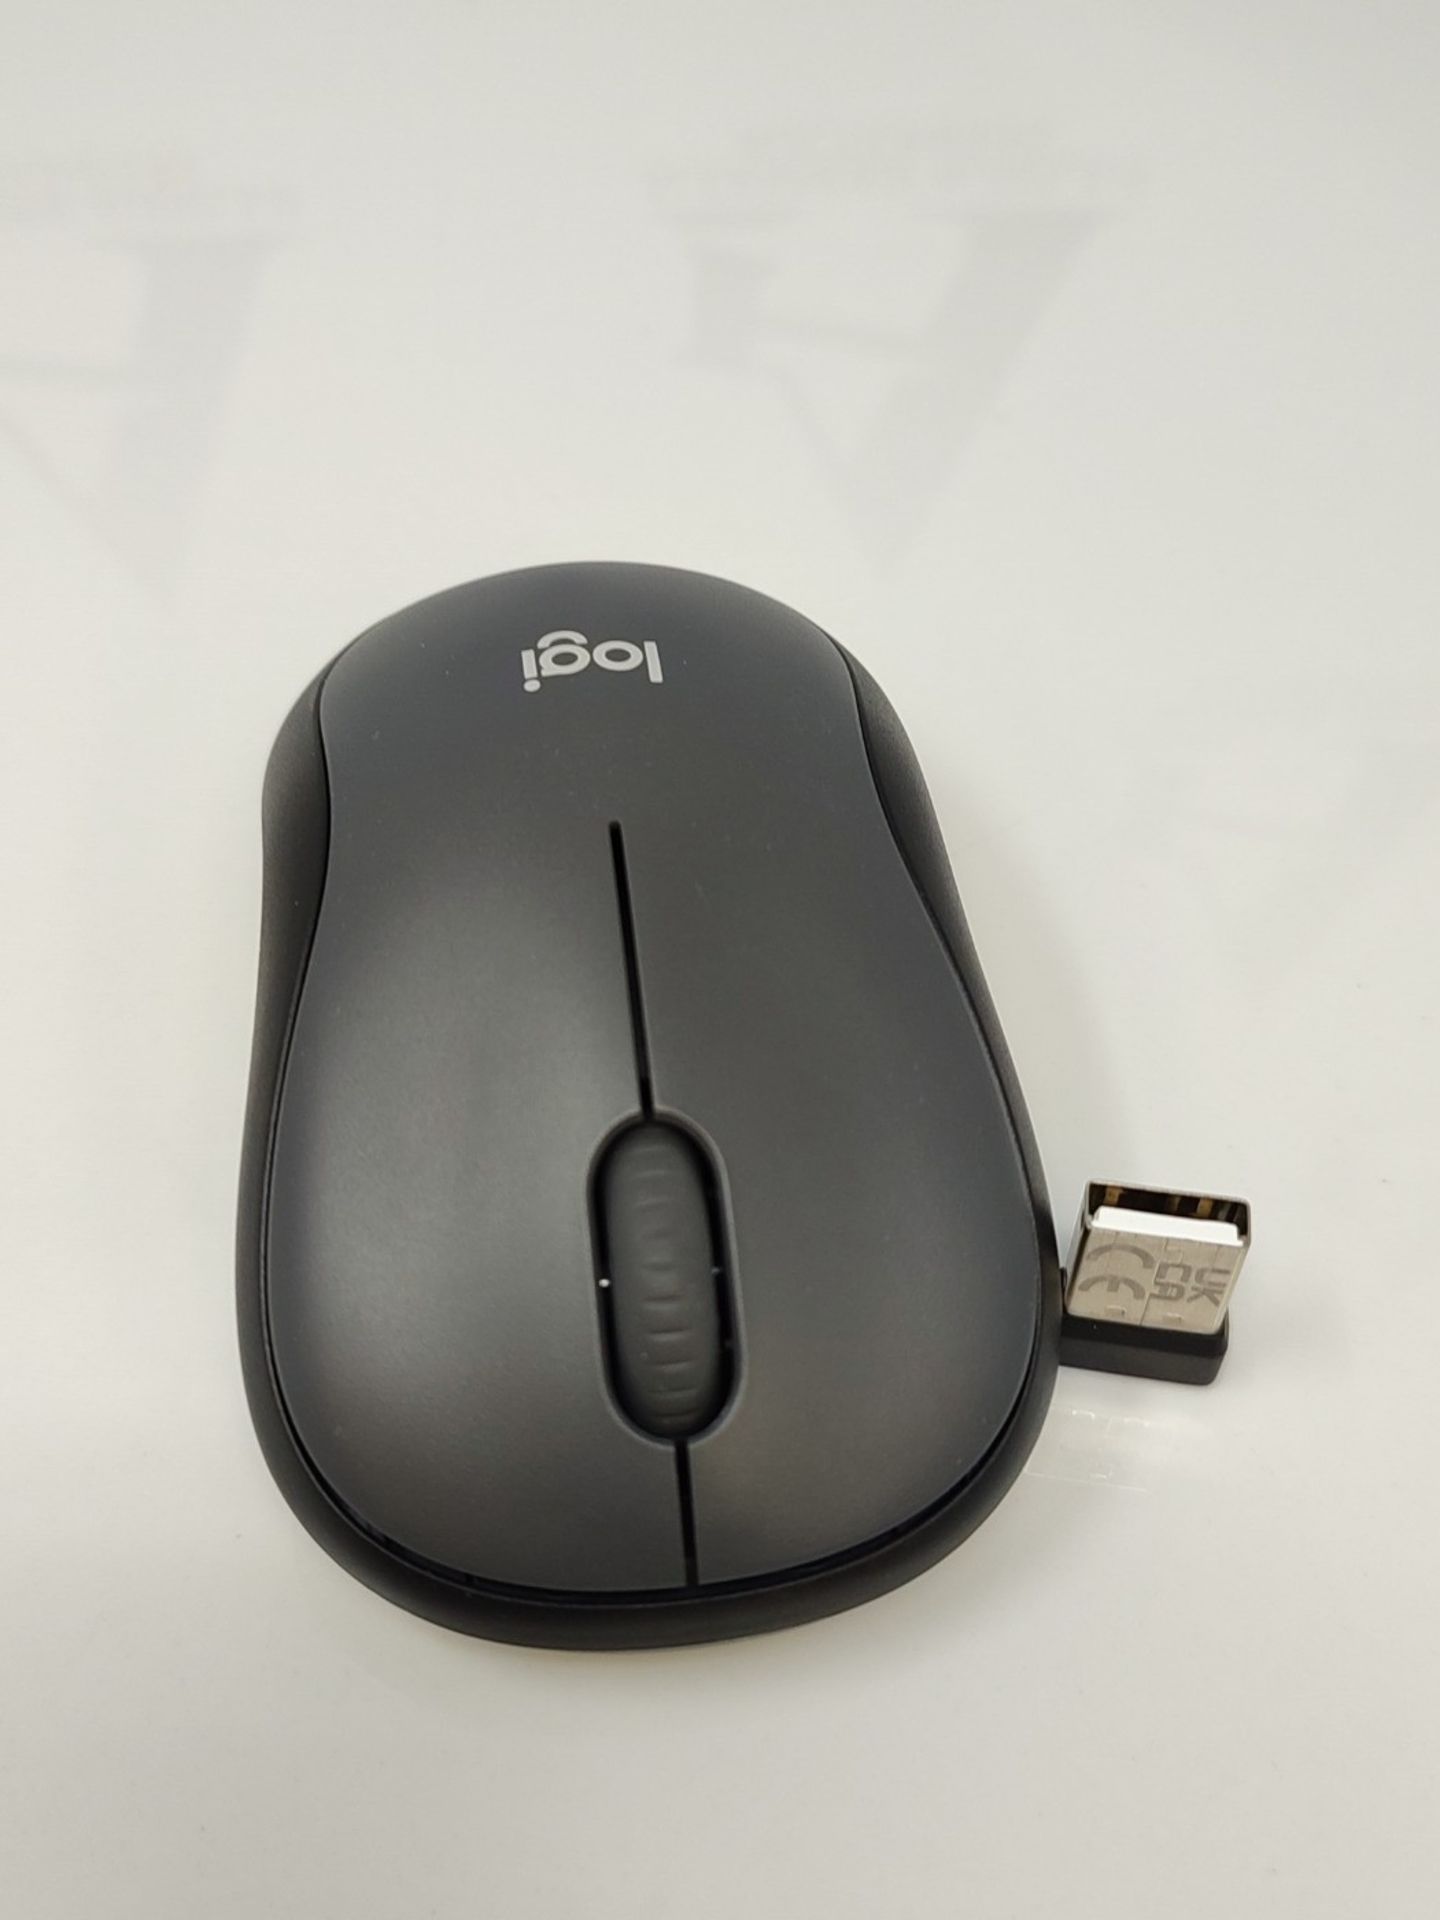 Logitech M220 SILENT Wireless Mouse, 2.4GHz with USB receiver, 1000 DPI Optical Tracki - Image 2 of 3